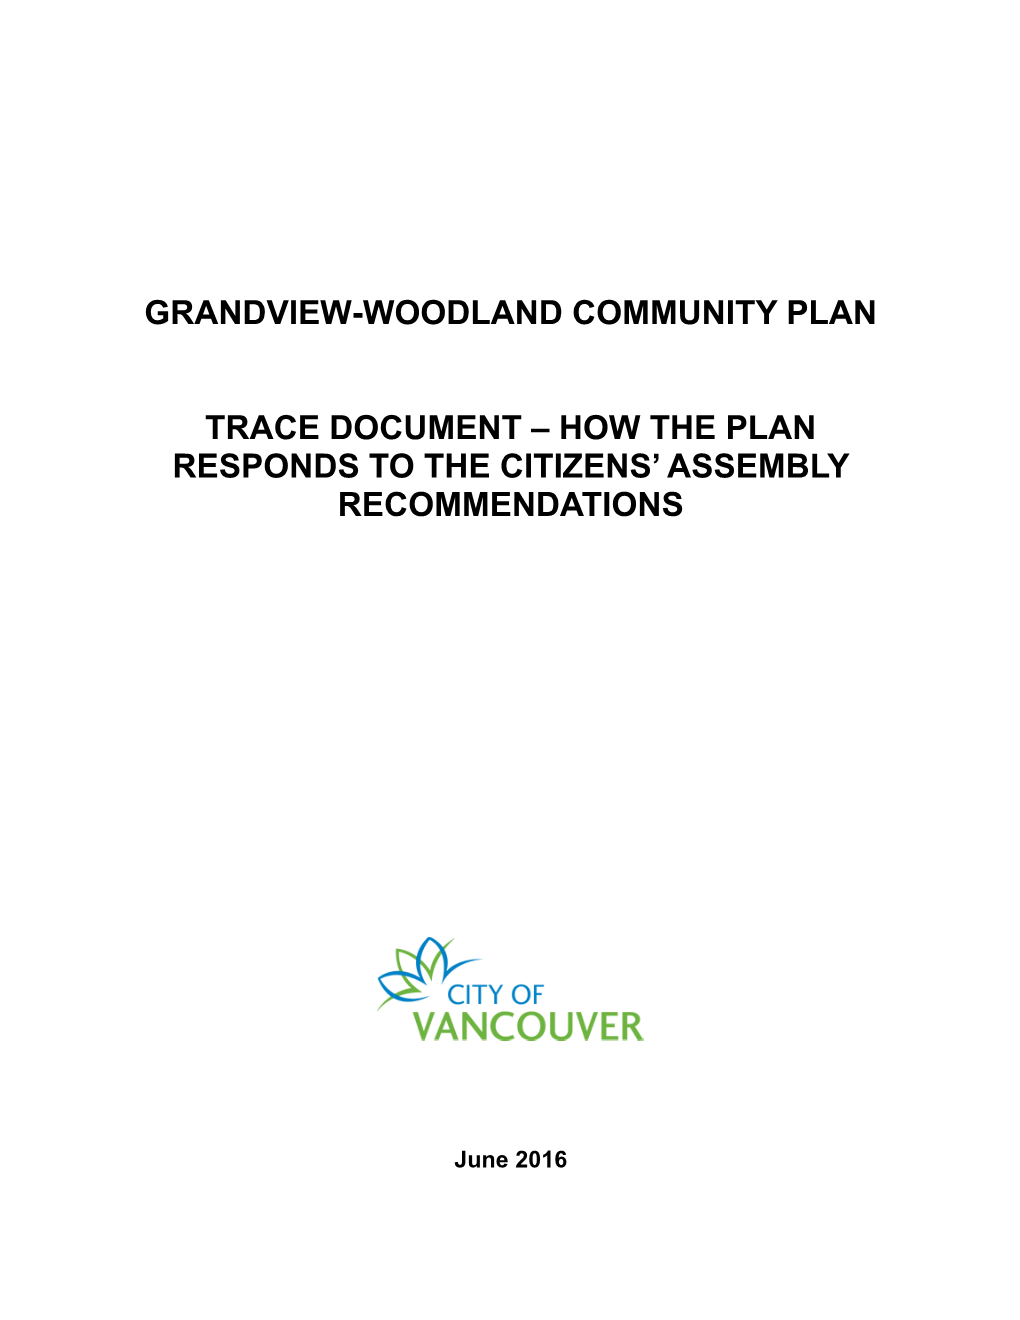 Grandview-Woodland Community Plan Trace Document – How the Plan Responds to the Citizens’ Assembly Recommendations